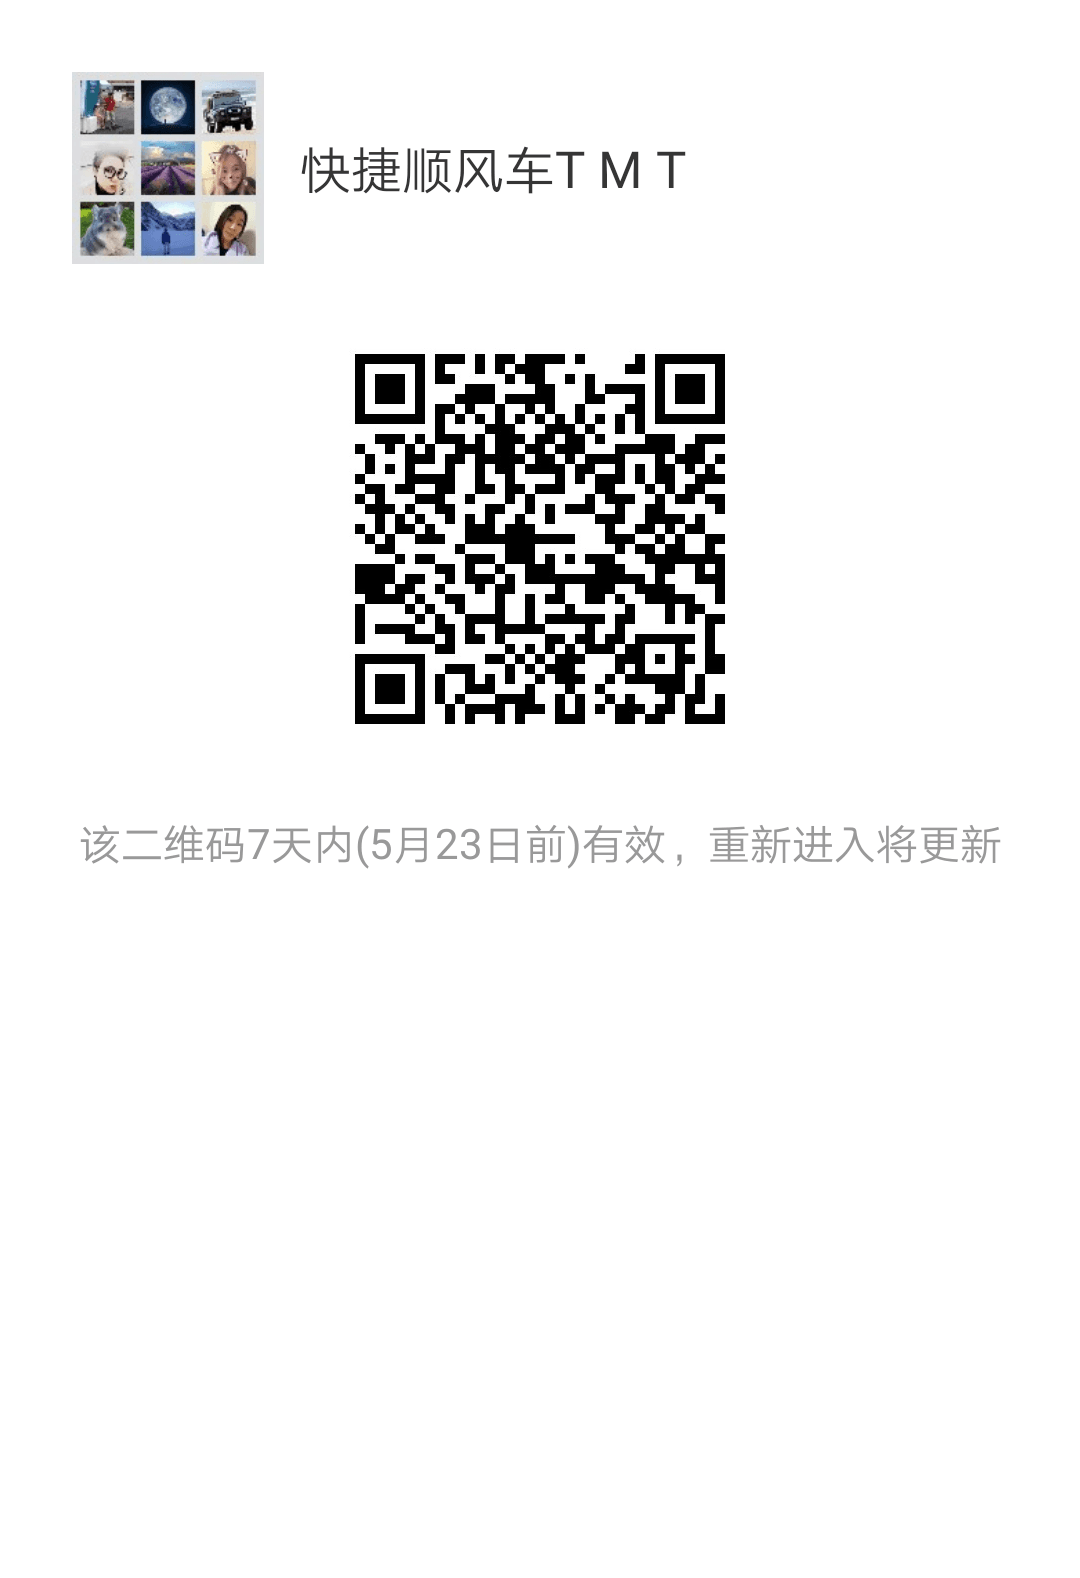 mmqrcode1494940588243.png